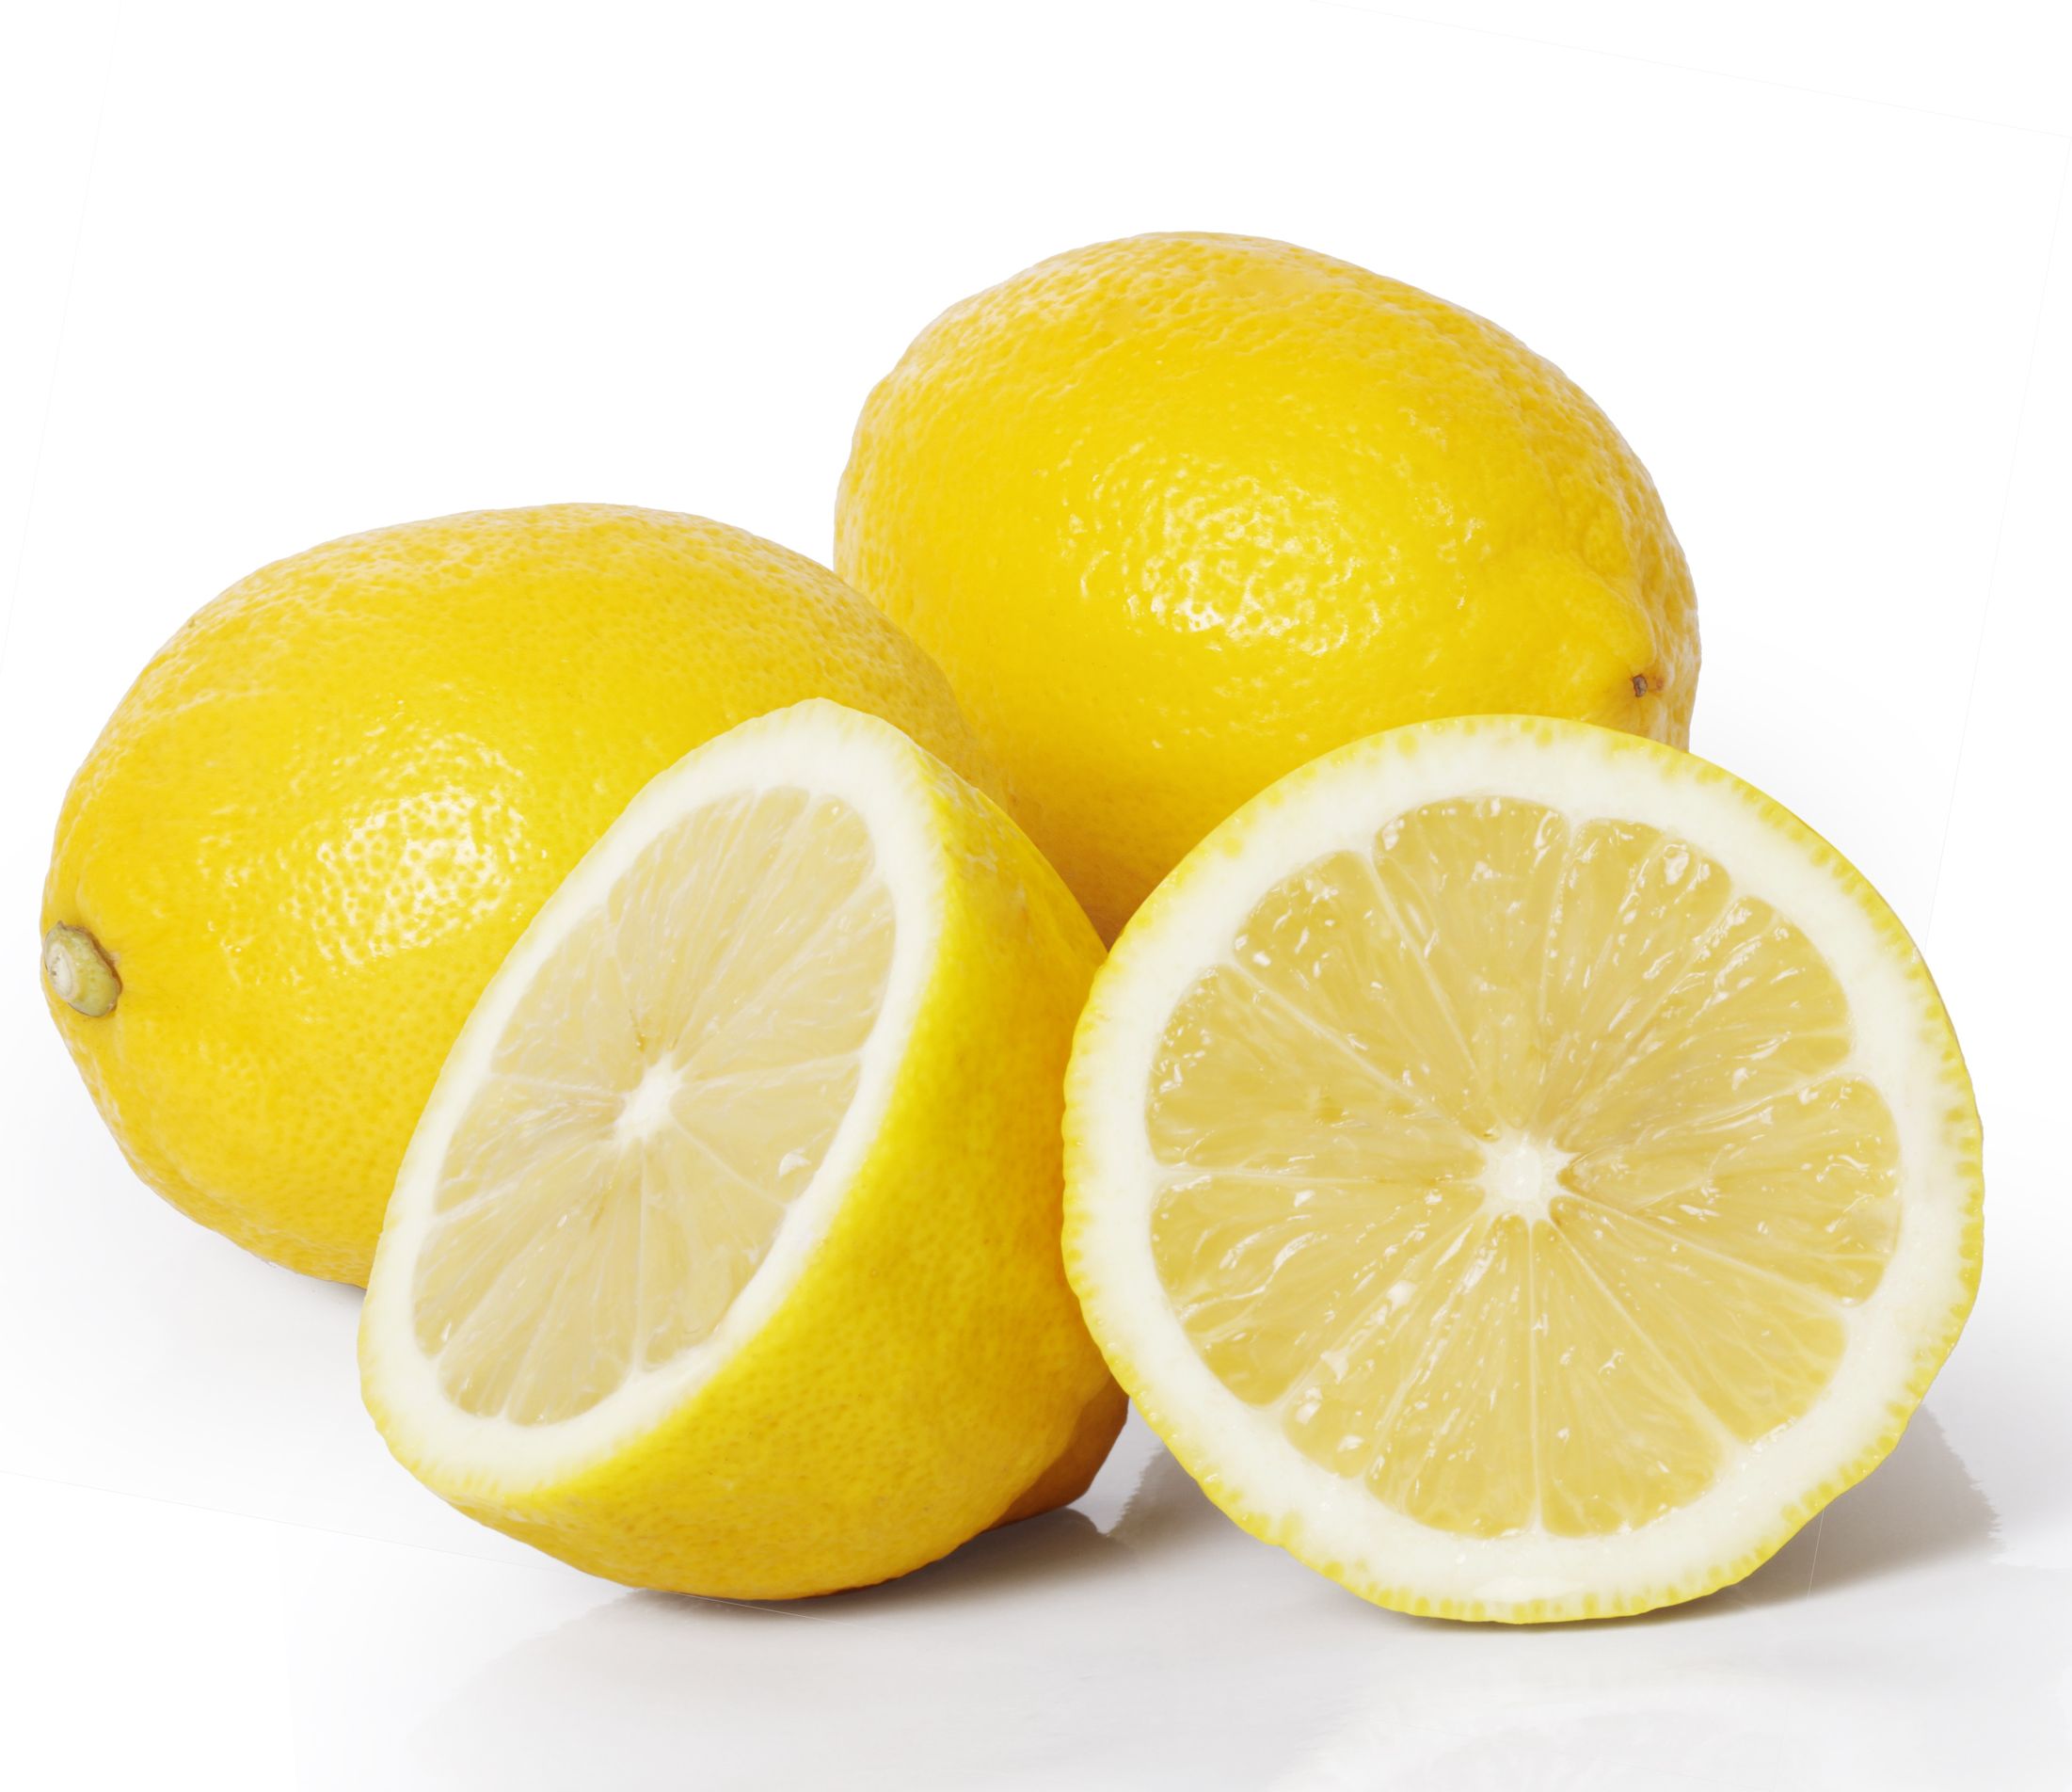 Squeezing some lemons and applying it gently with cotton to your face is a ...